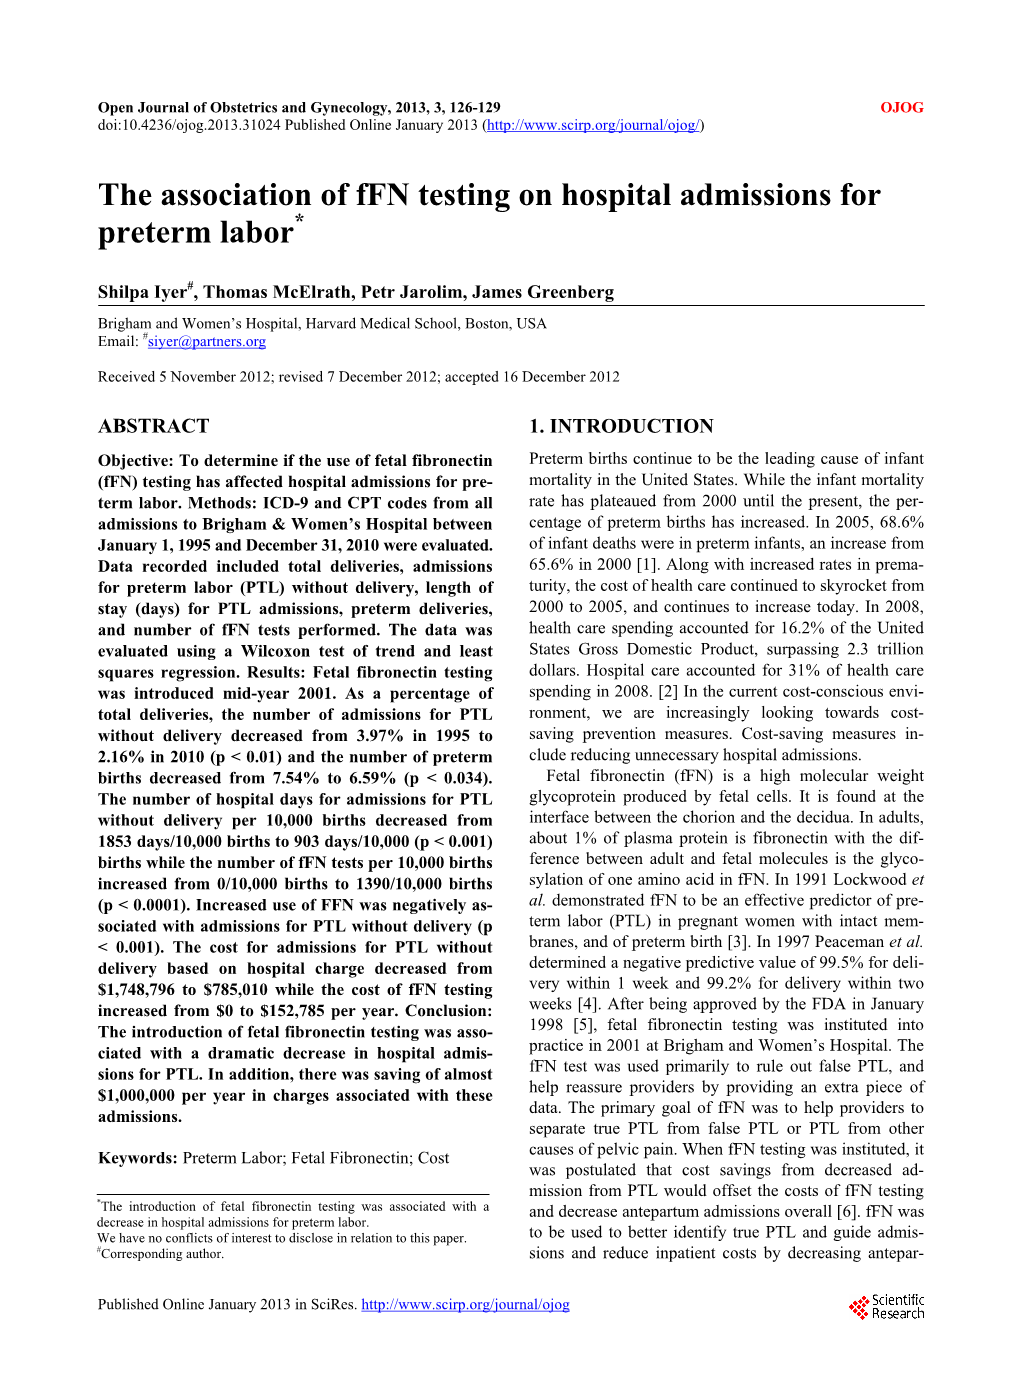 The Association of Ffn Testing on Hospital Admissions for Preterm Labor*